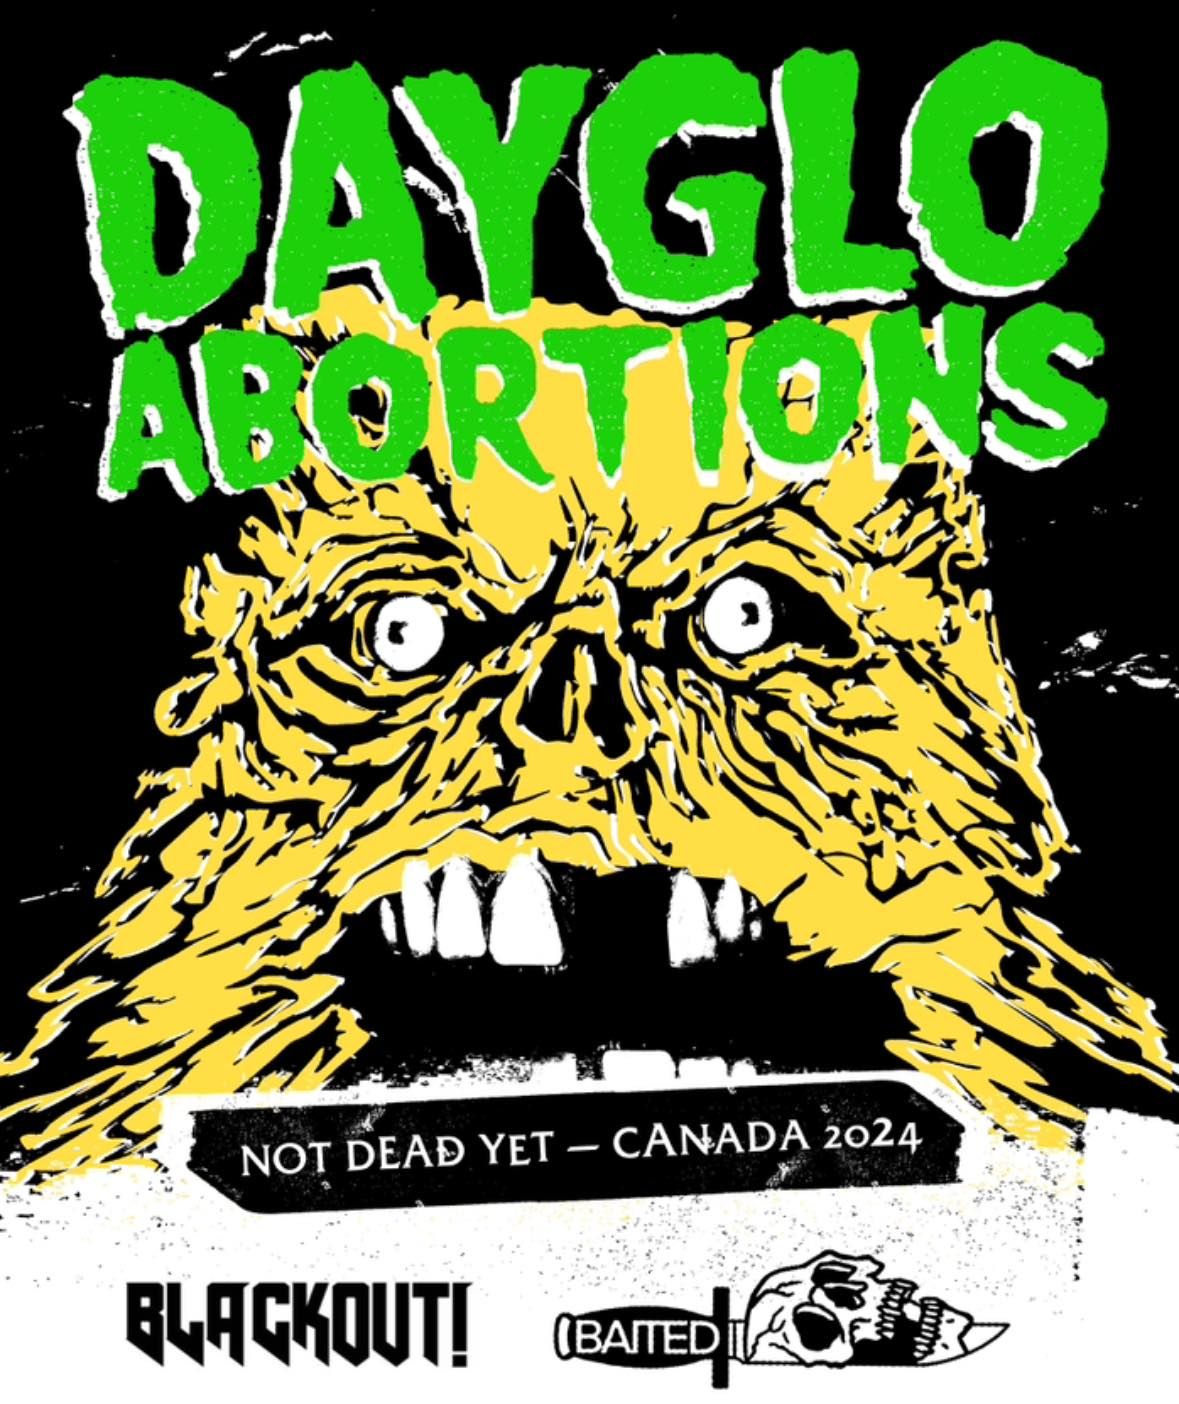 Dayglo Abortions with Blackout,Baited & Spades